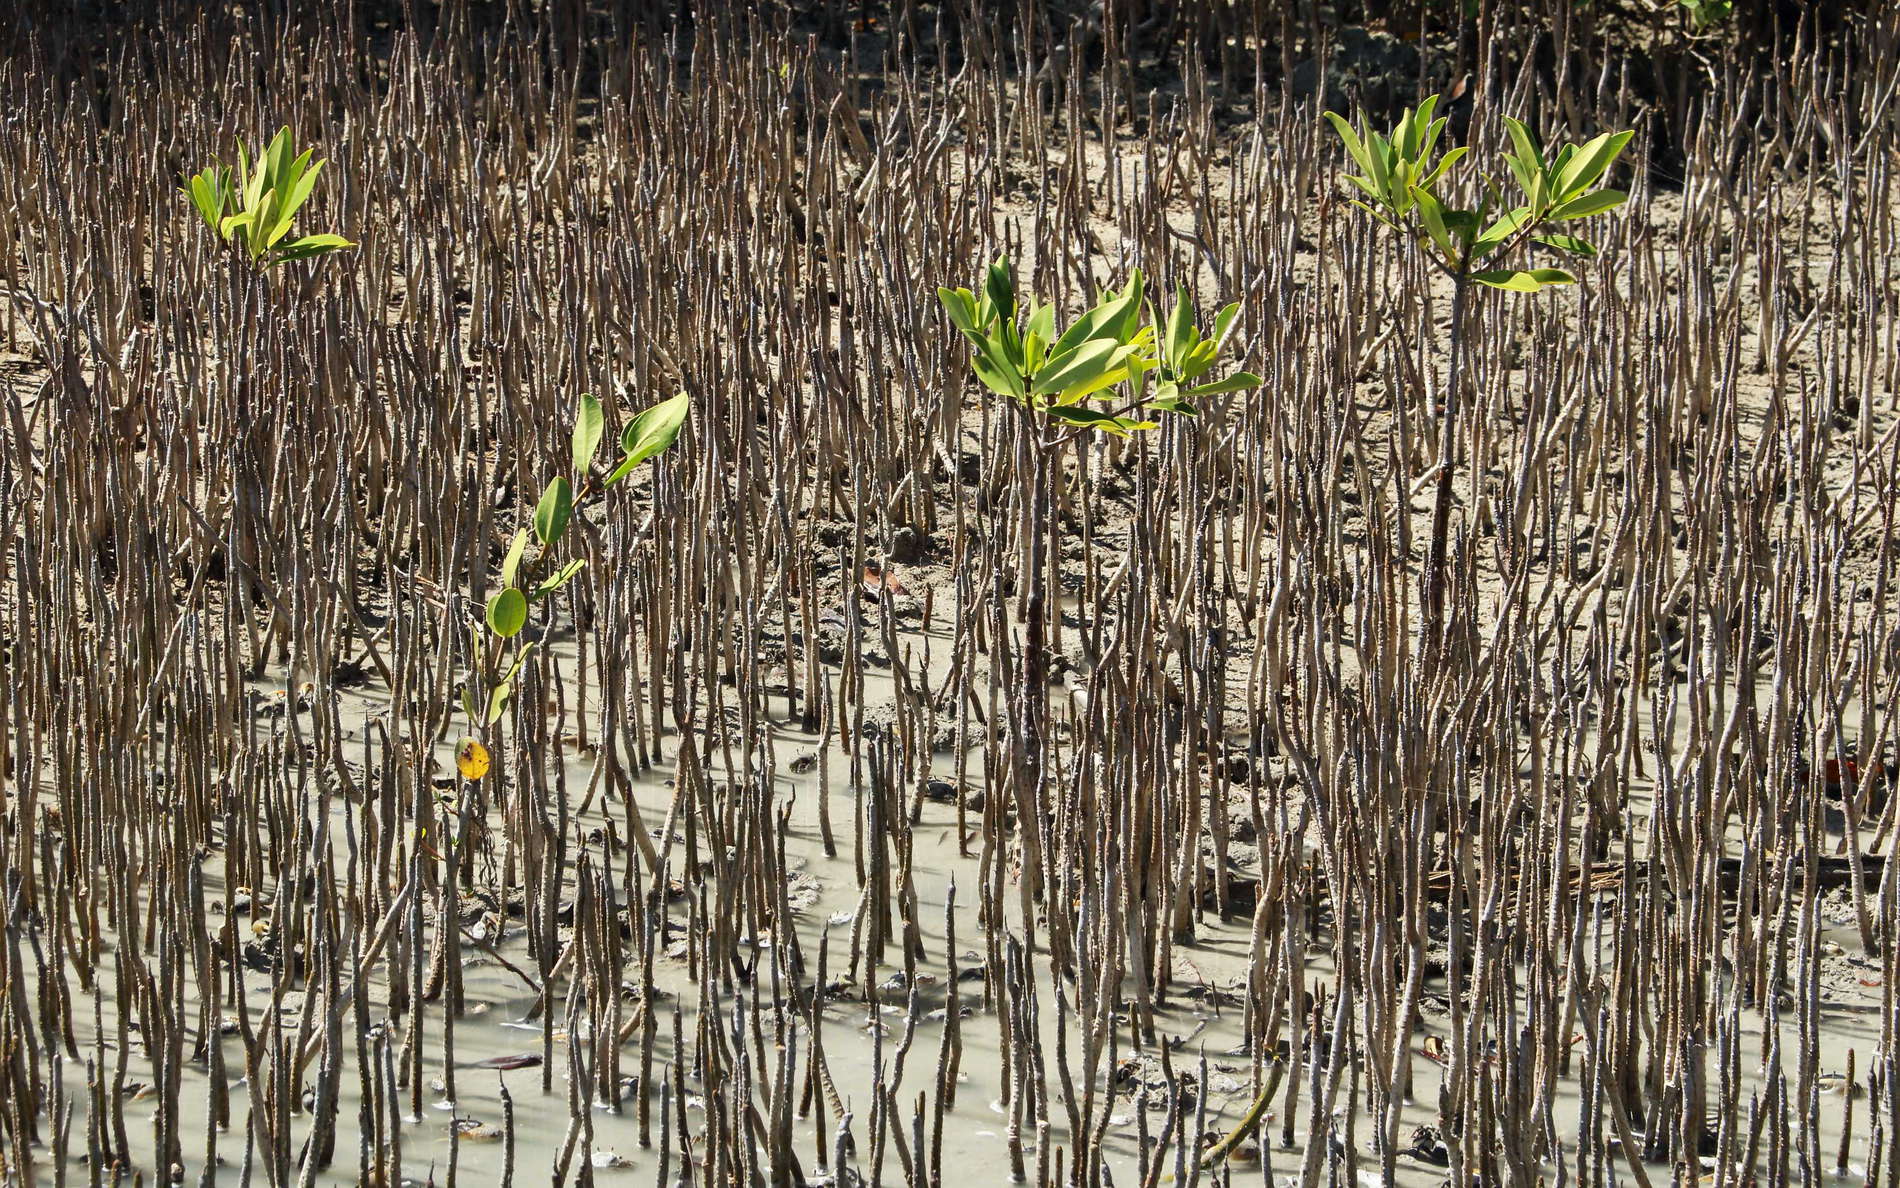 Les Salines | Mangroves with respiration roots